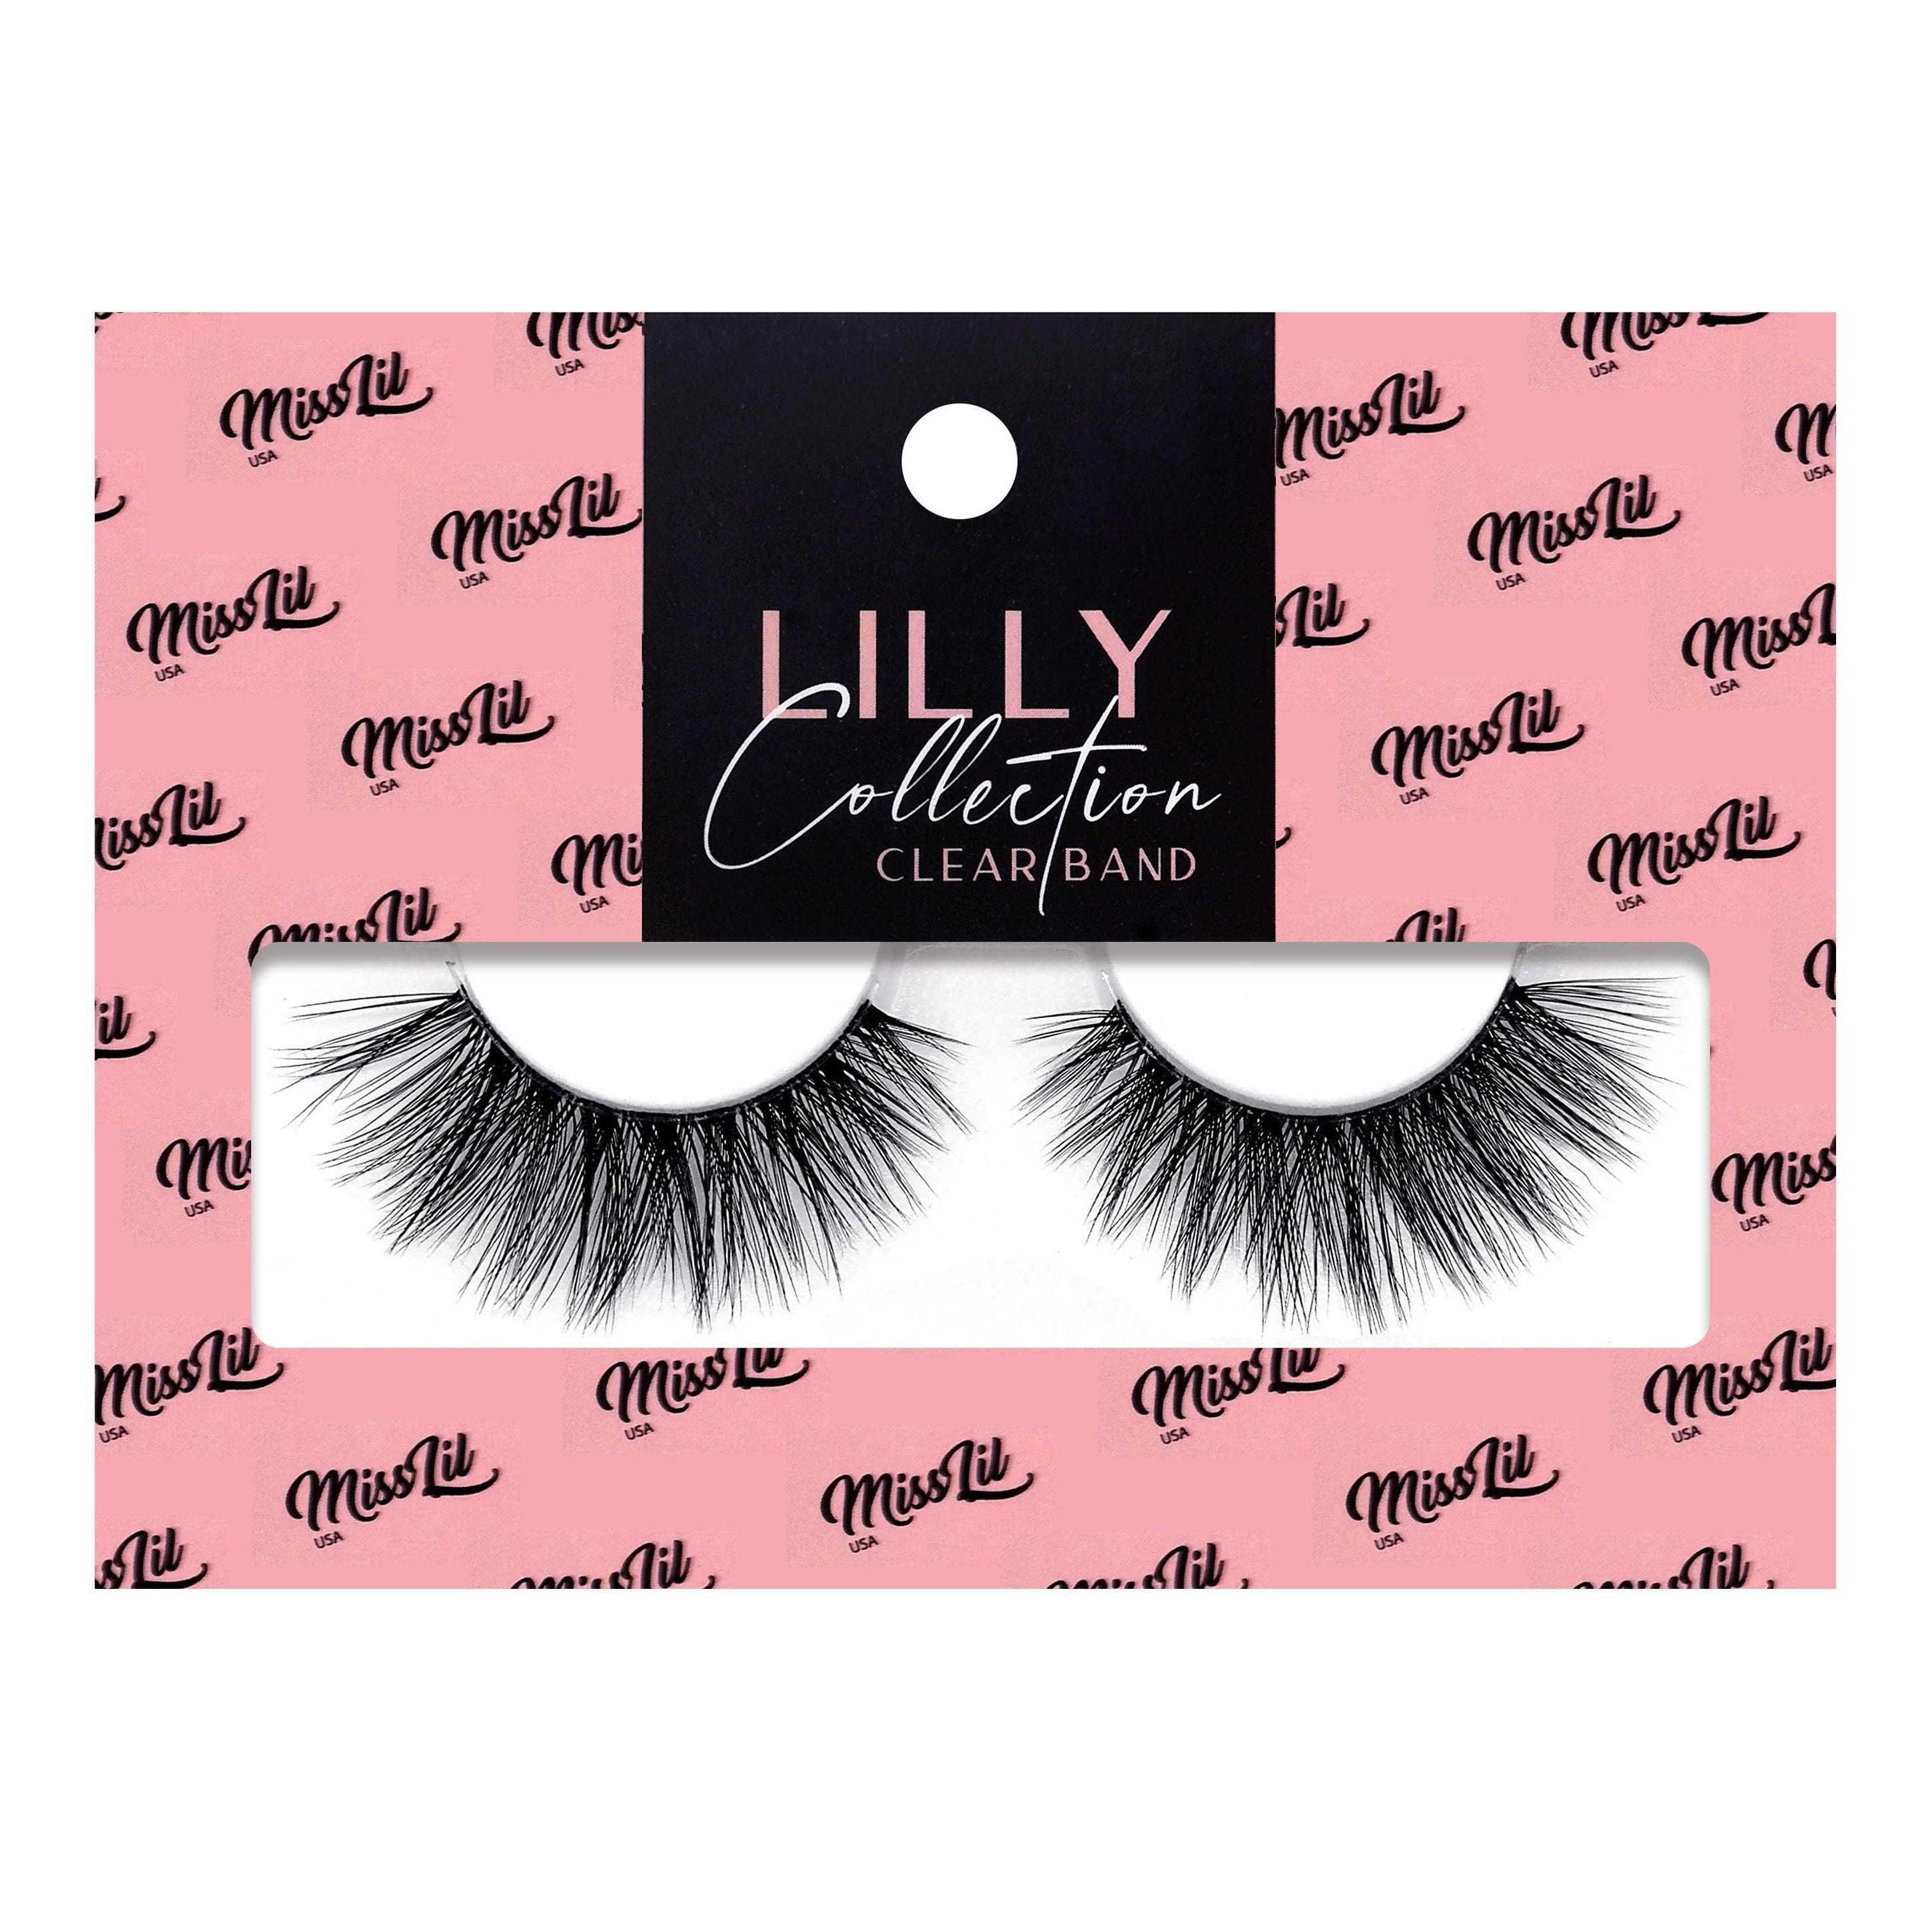 1-Pair Lashes-Lilly Collection #5 (Pack of 12) - Miss Lil USA Wholesale